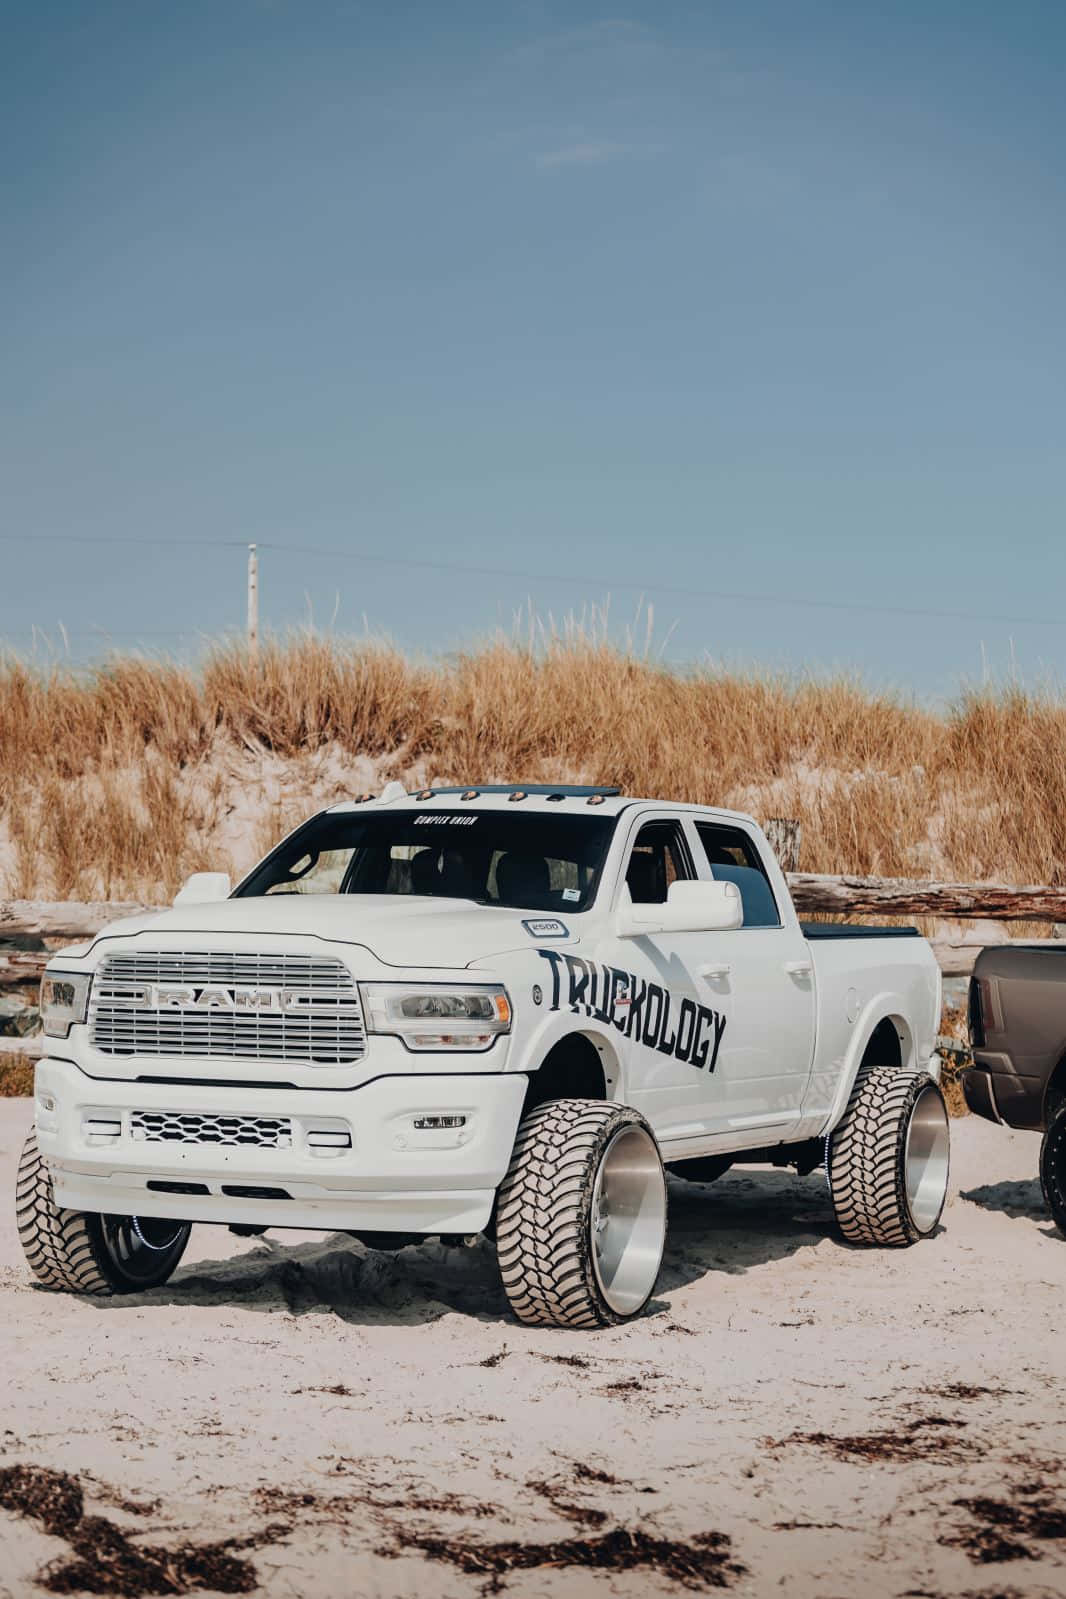 1080x1920 Truck Wallpapers for IPhone 6S 7 8 Retina HD